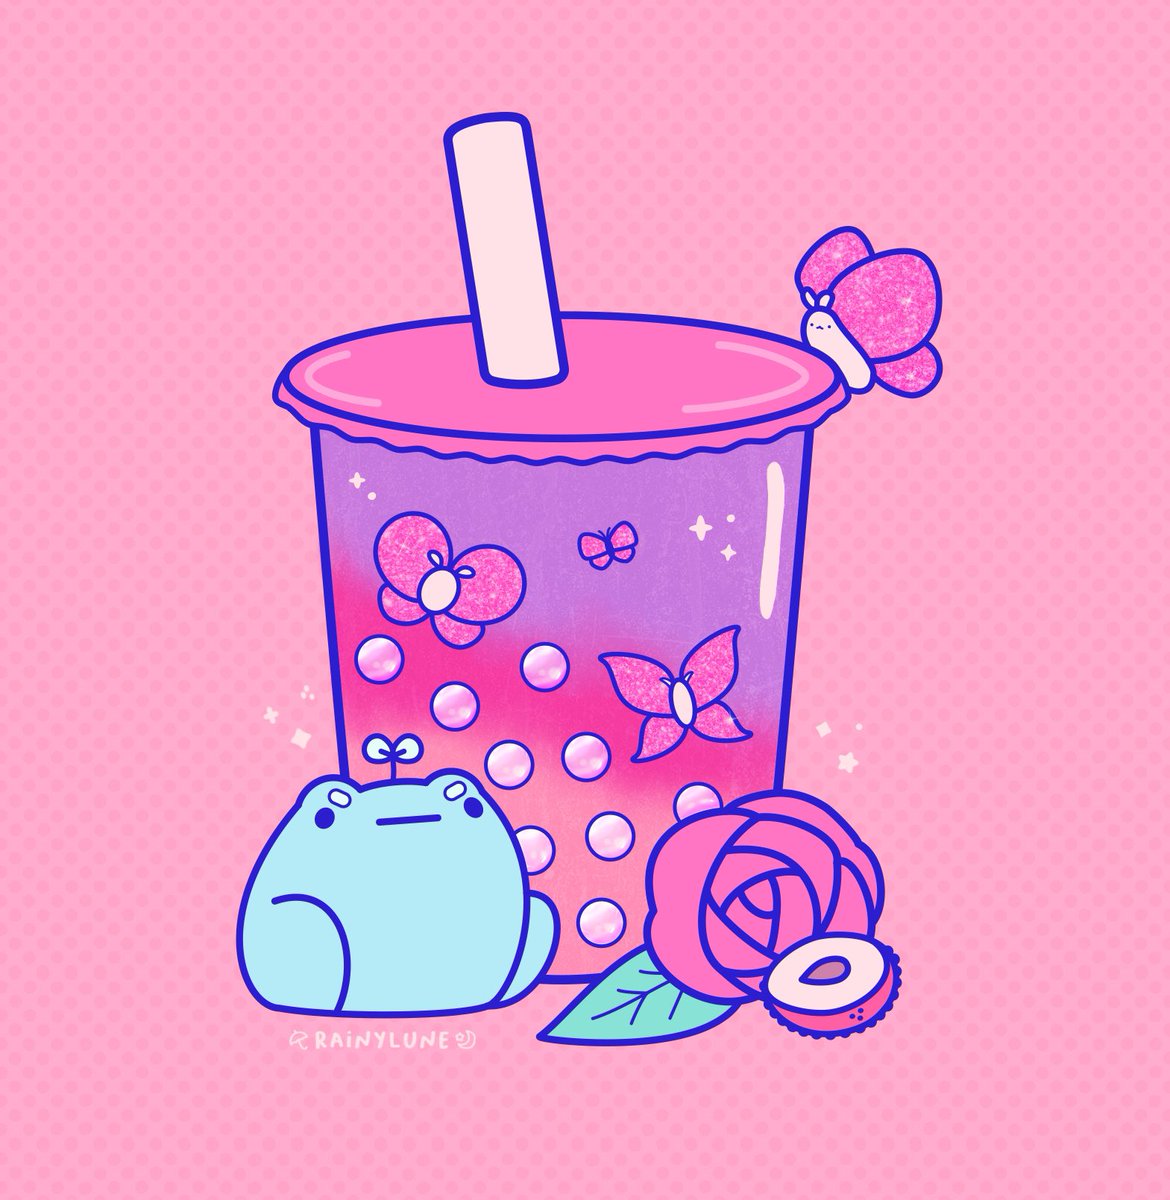 「rose lychee butterfly boba!! the butterf」|rachel 🐸 reichenbachのイラスト